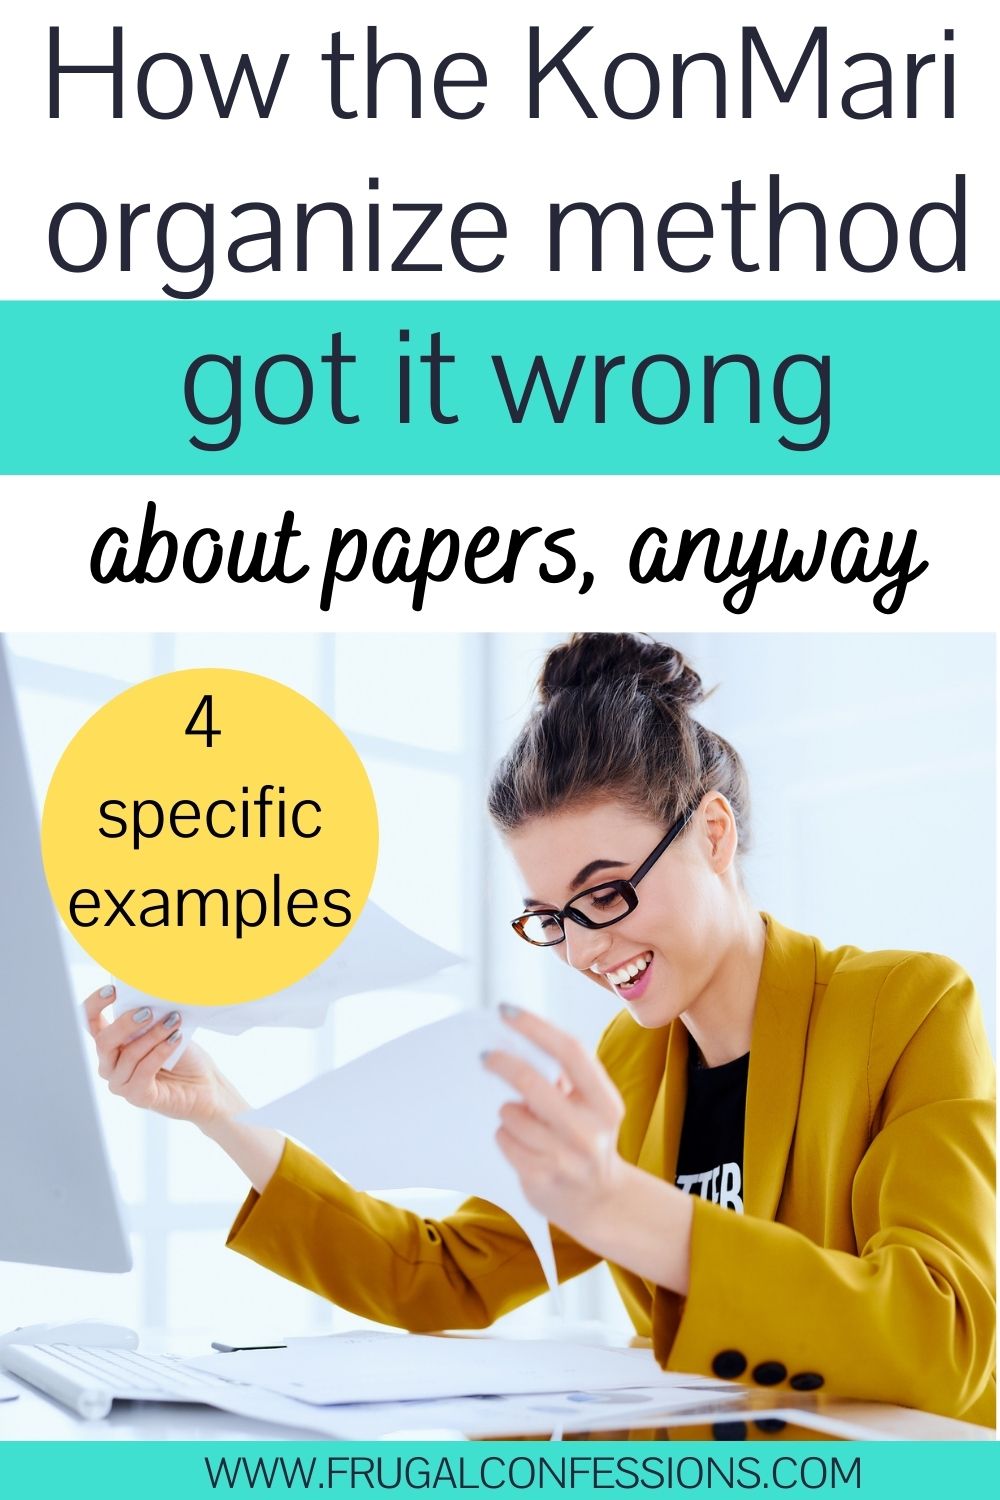 professional woman in mustard business jacket with papers, text overlay "how the KonMari organize method got it wrong about papers"